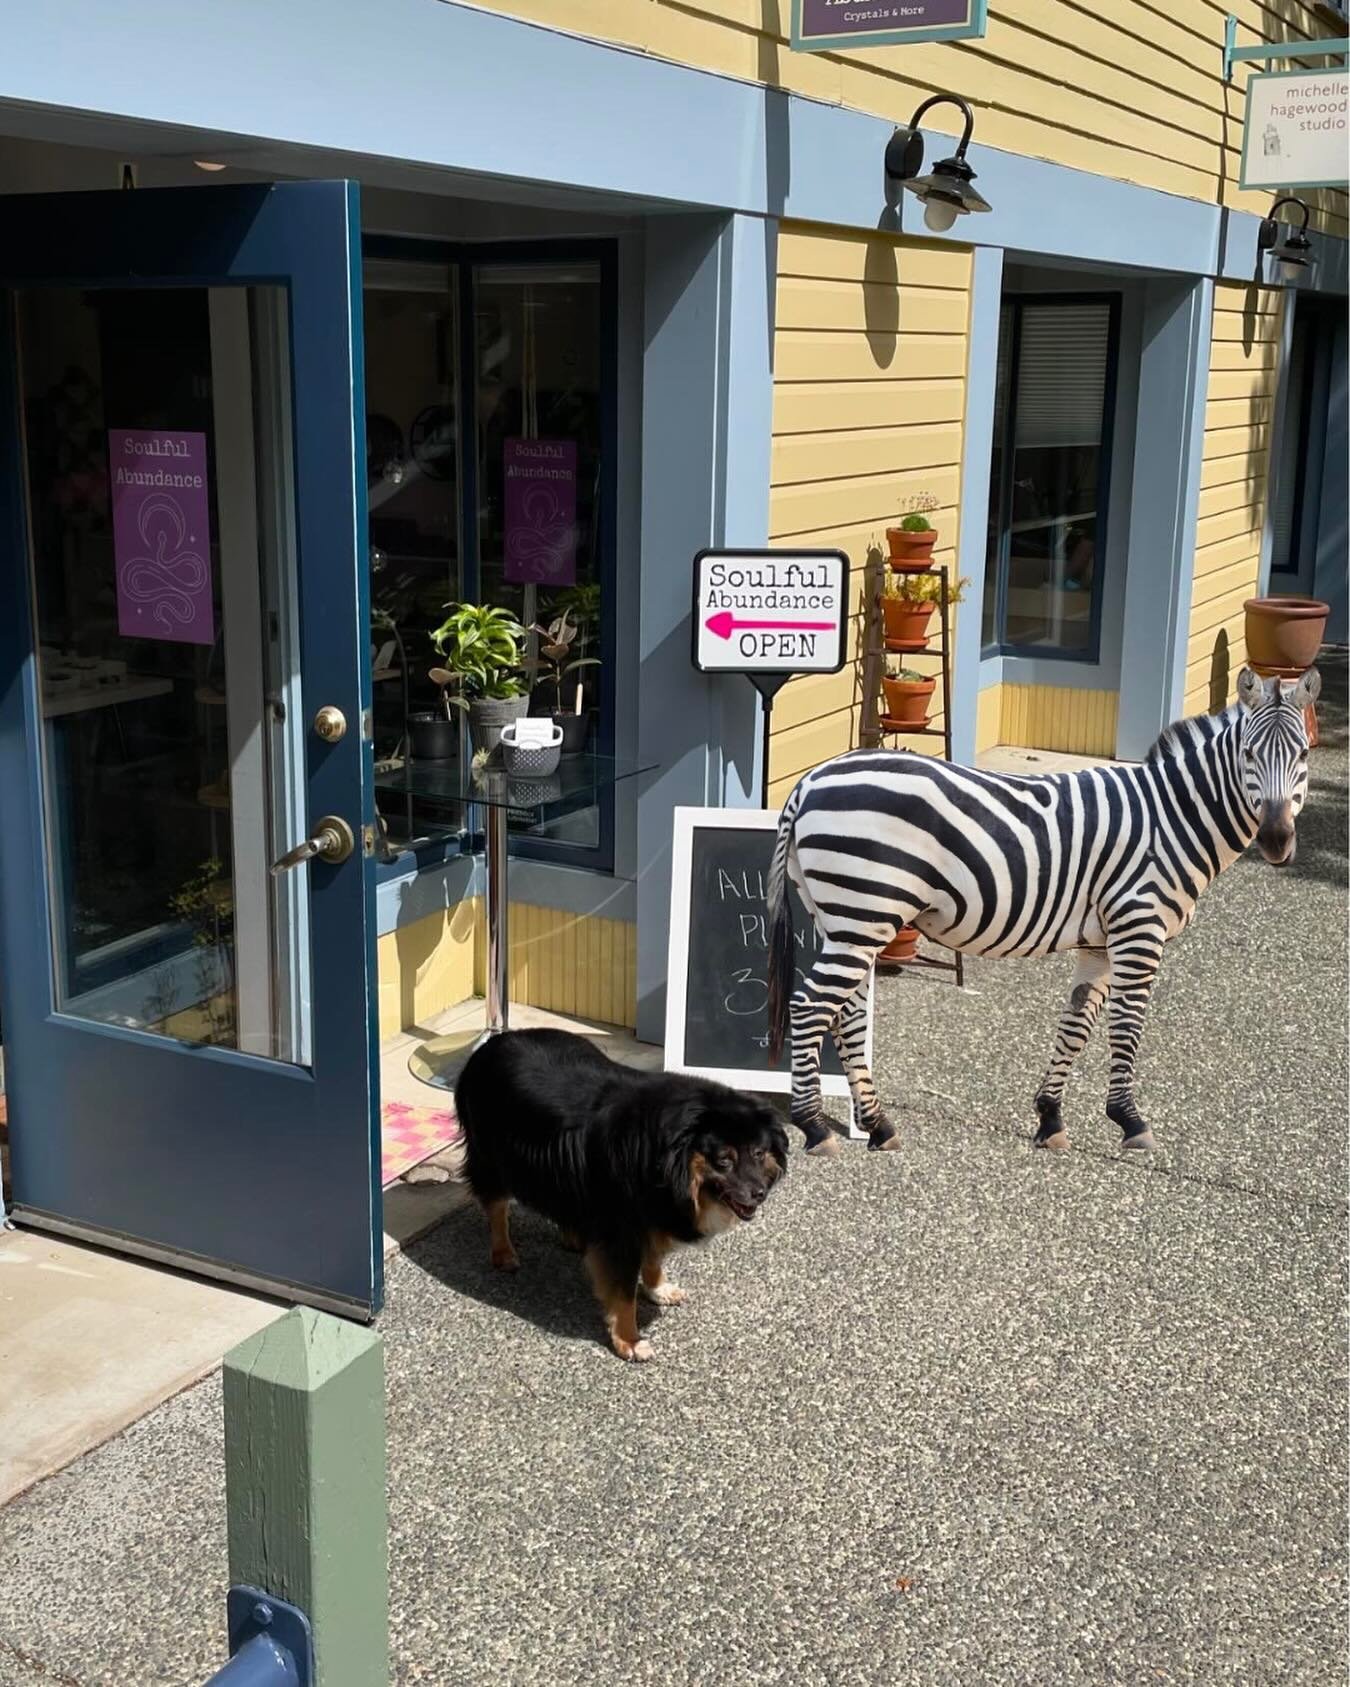 Even zebra&rsquo;s love crystals!  Z made it all the way from North Bend to shop at Soulful Abundance and meet Sophie. IYKYK. 
.
#zebraescape #crystallove #soulfulabundance #northbendzebrasighting🐟🌿 #northbendzebra🦓 #porttownsend